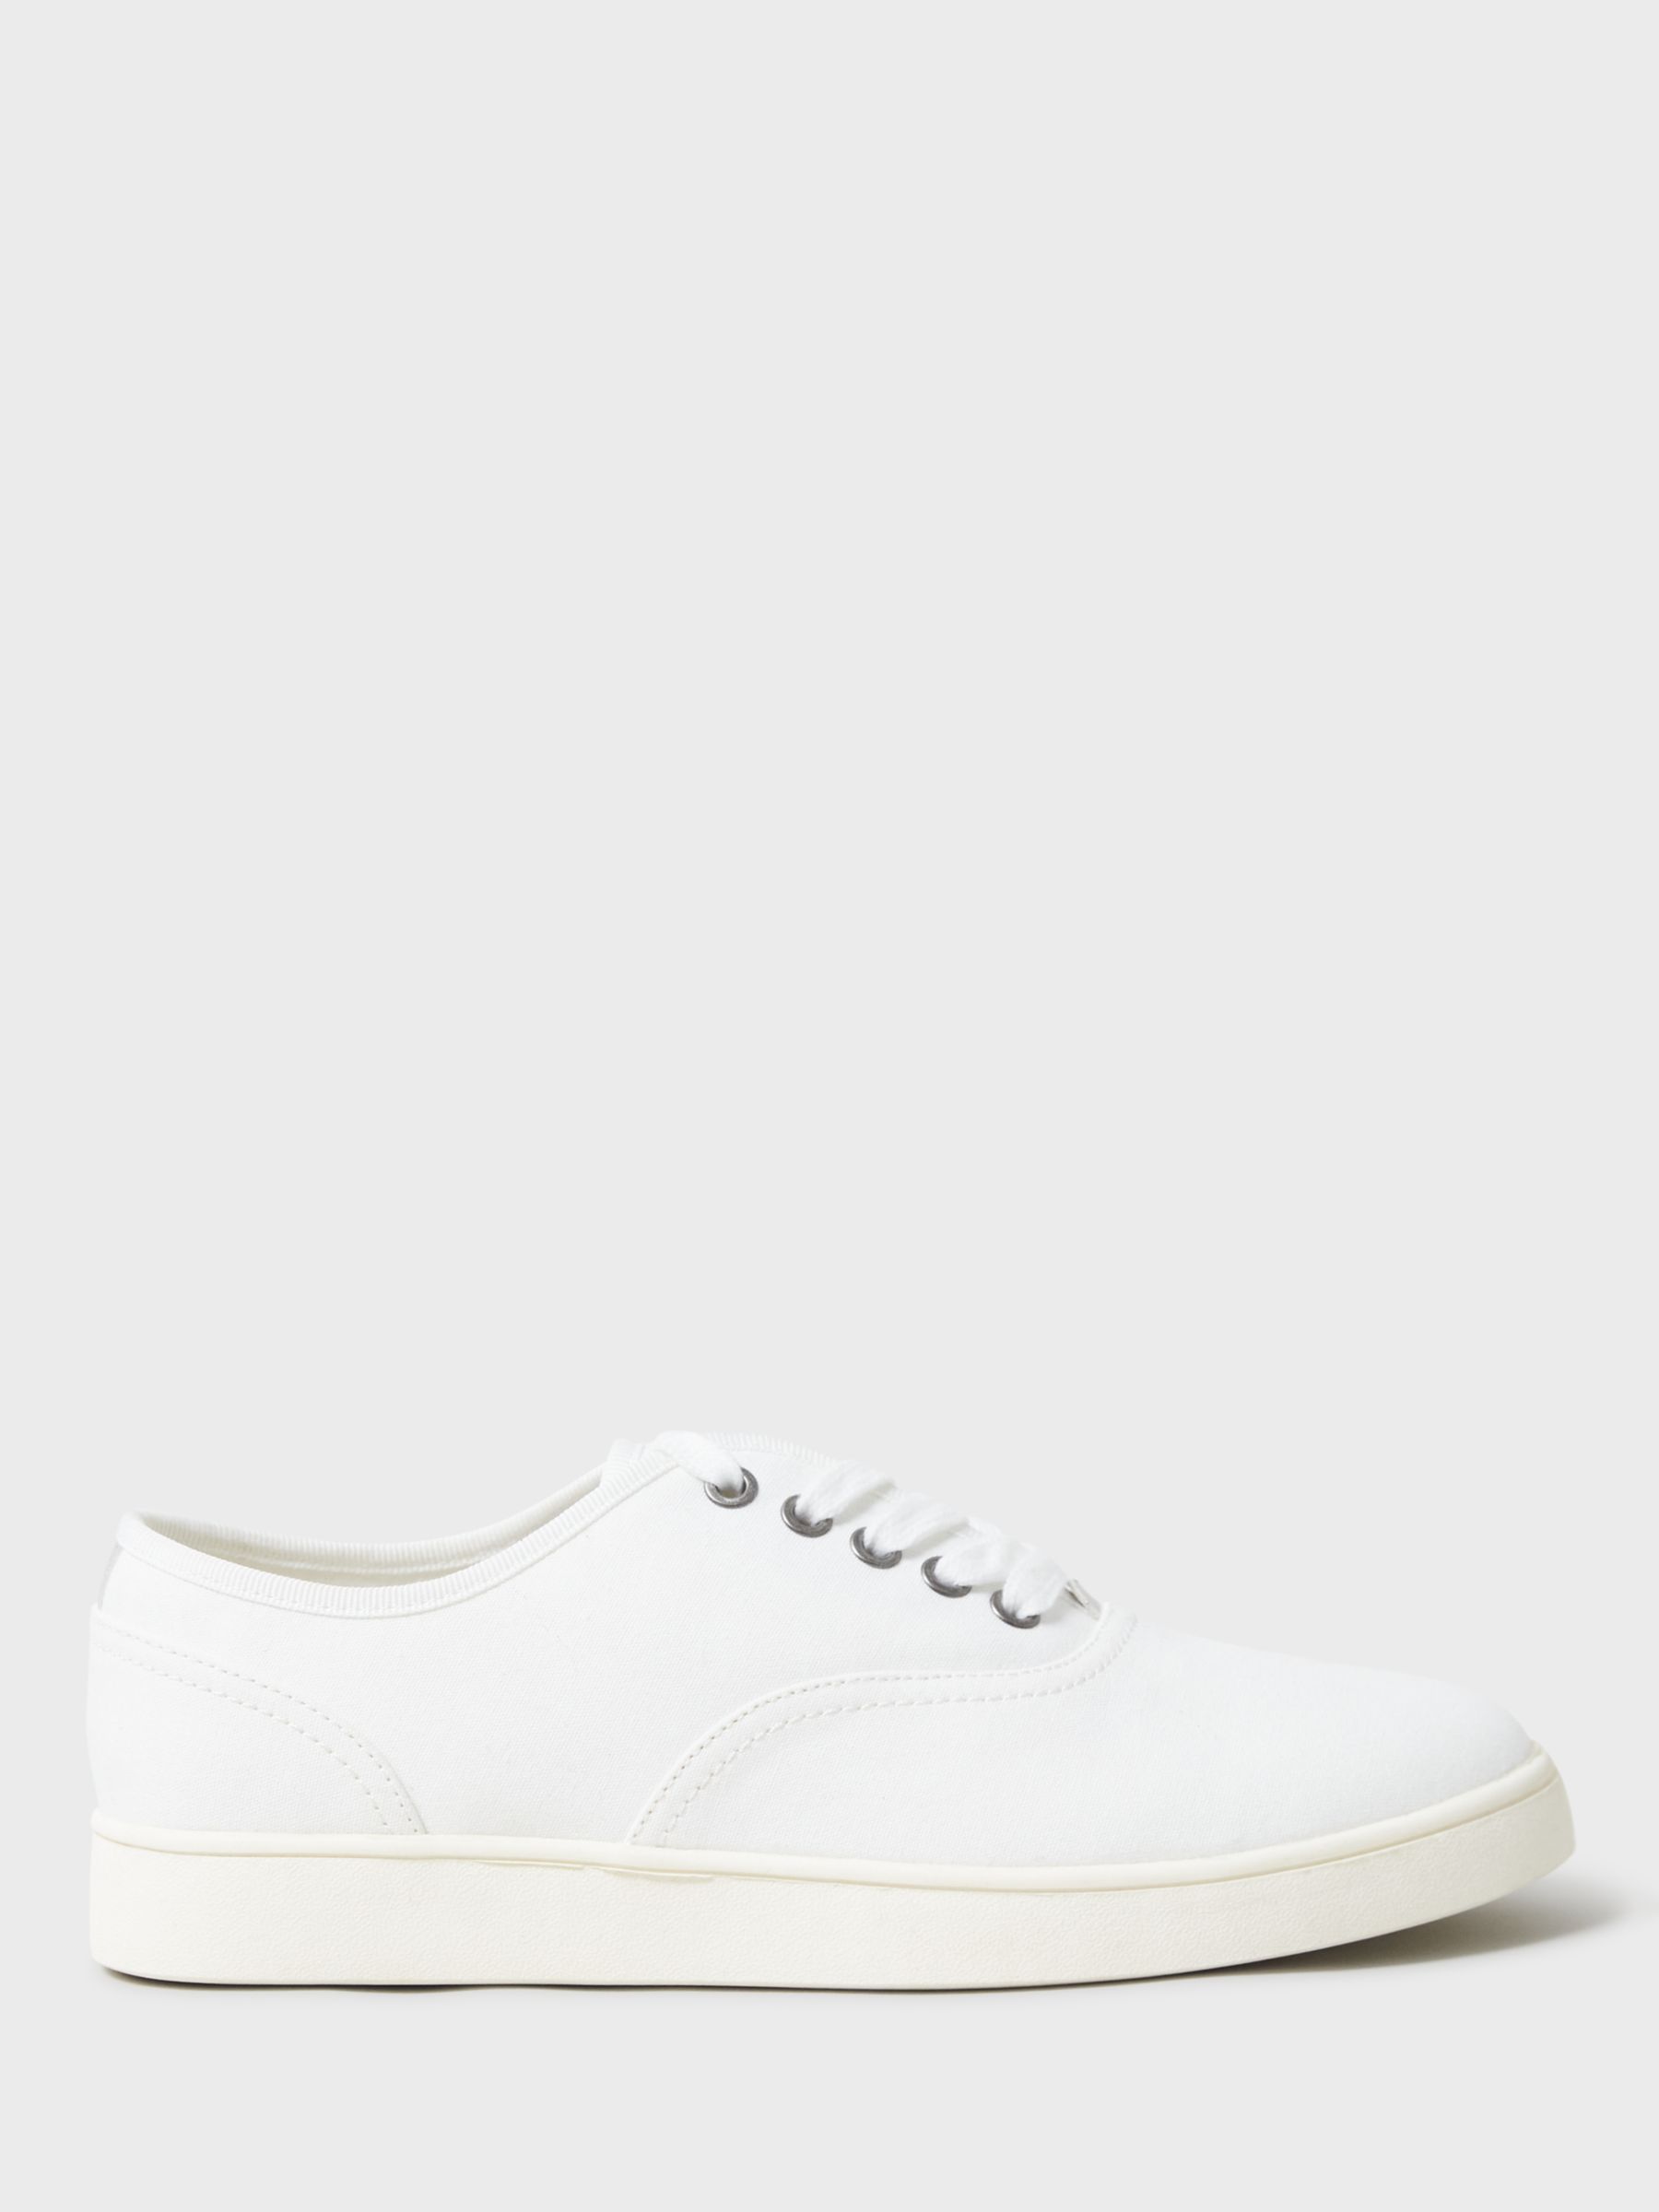 Crew Clothing Canvas Oxford Trainers, White, 3